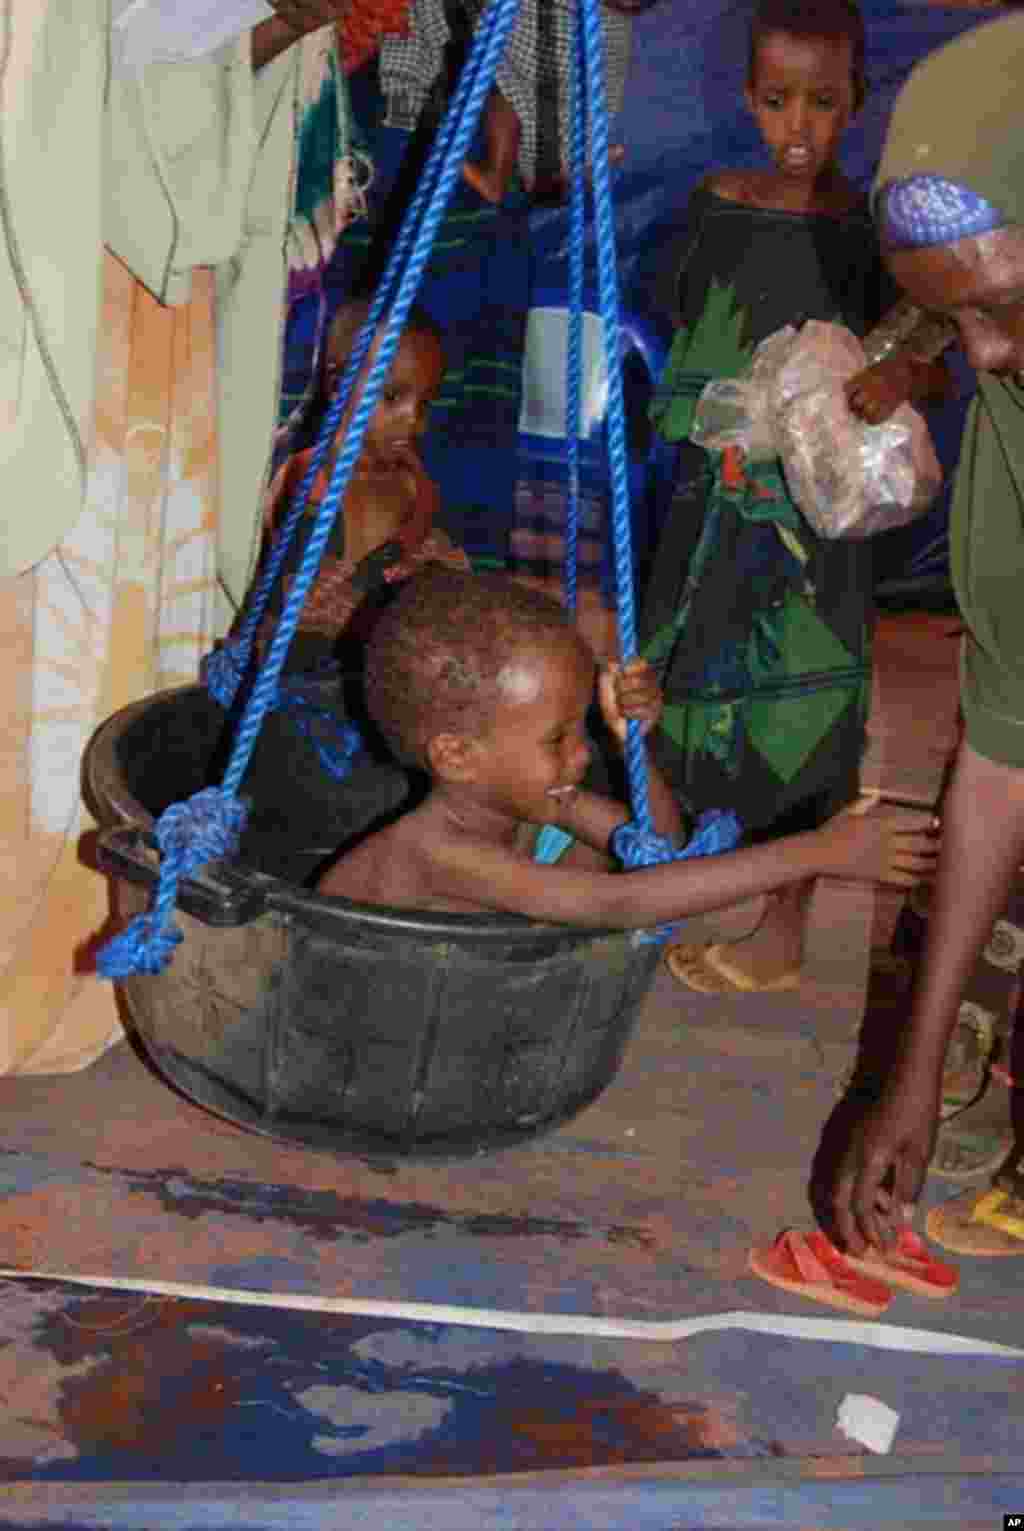 Children are weighed as part of the malnutrition screening process. VOA - P. Heinlein